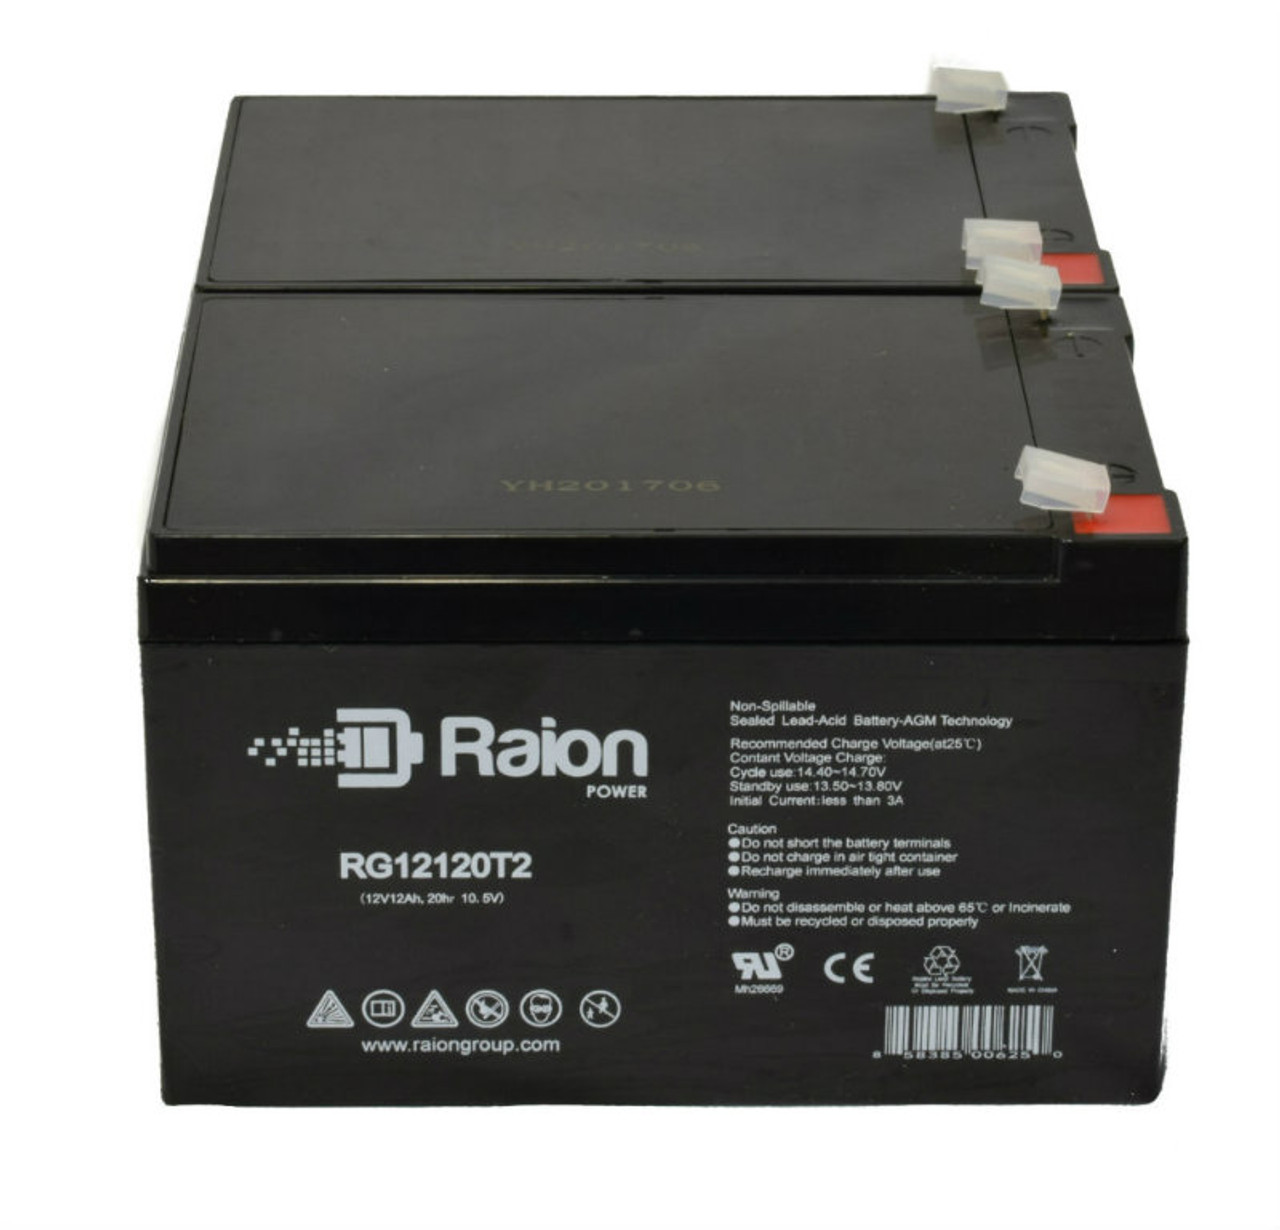 Raion Power 12V 12Ah Non-Spillable Compatible Replacement Battery for Axyl AXB12120 - (2 Pack)